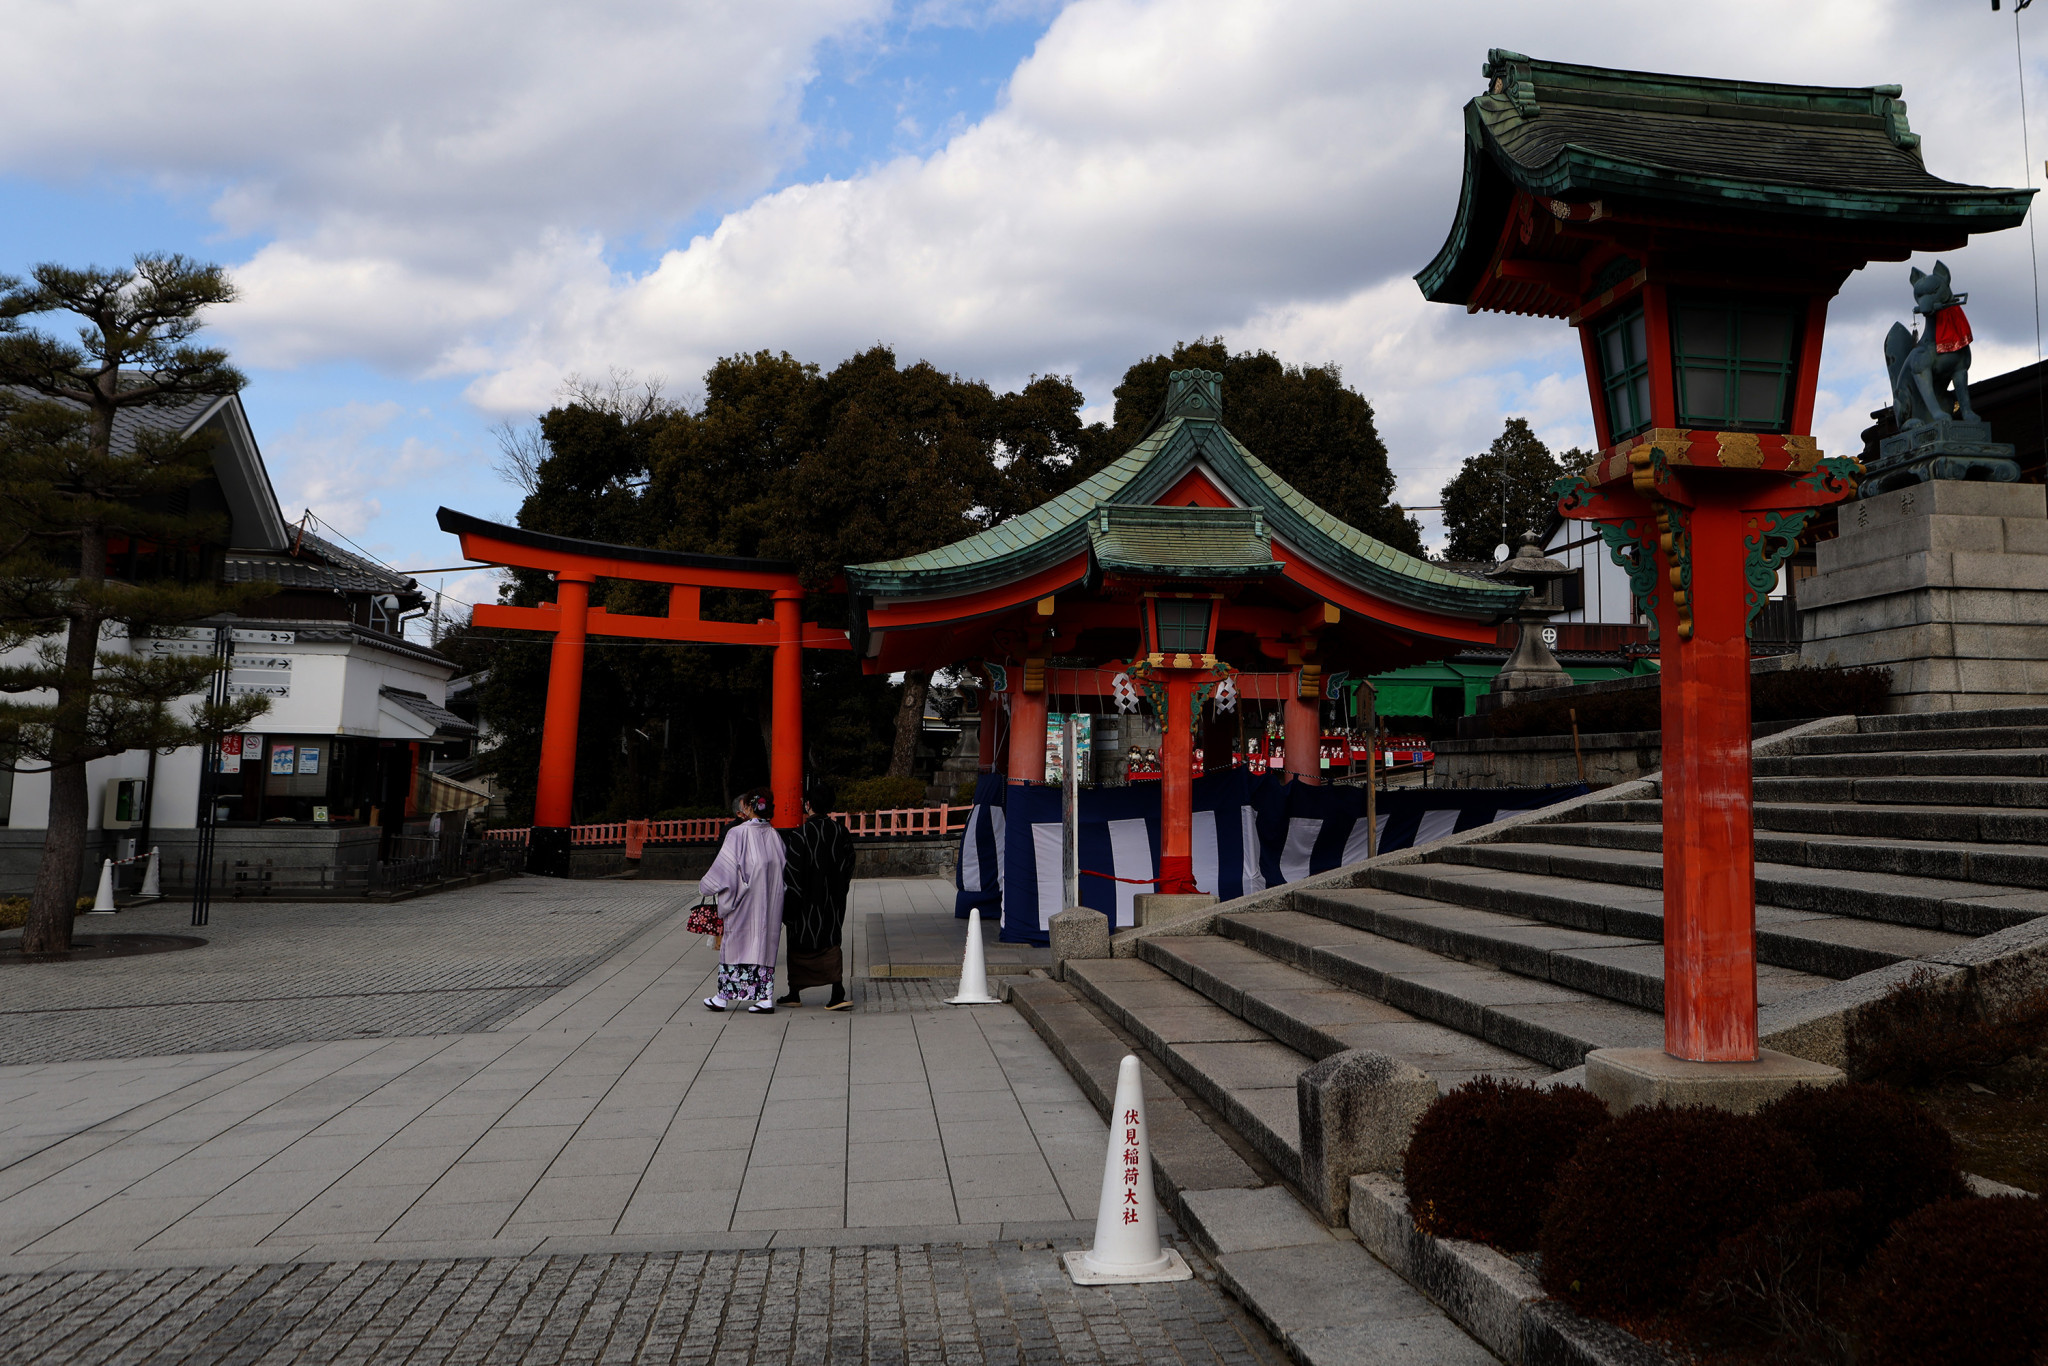 Japan Tourism Agency reports 87 per cent drop in visitors in 2020 due to pandemic